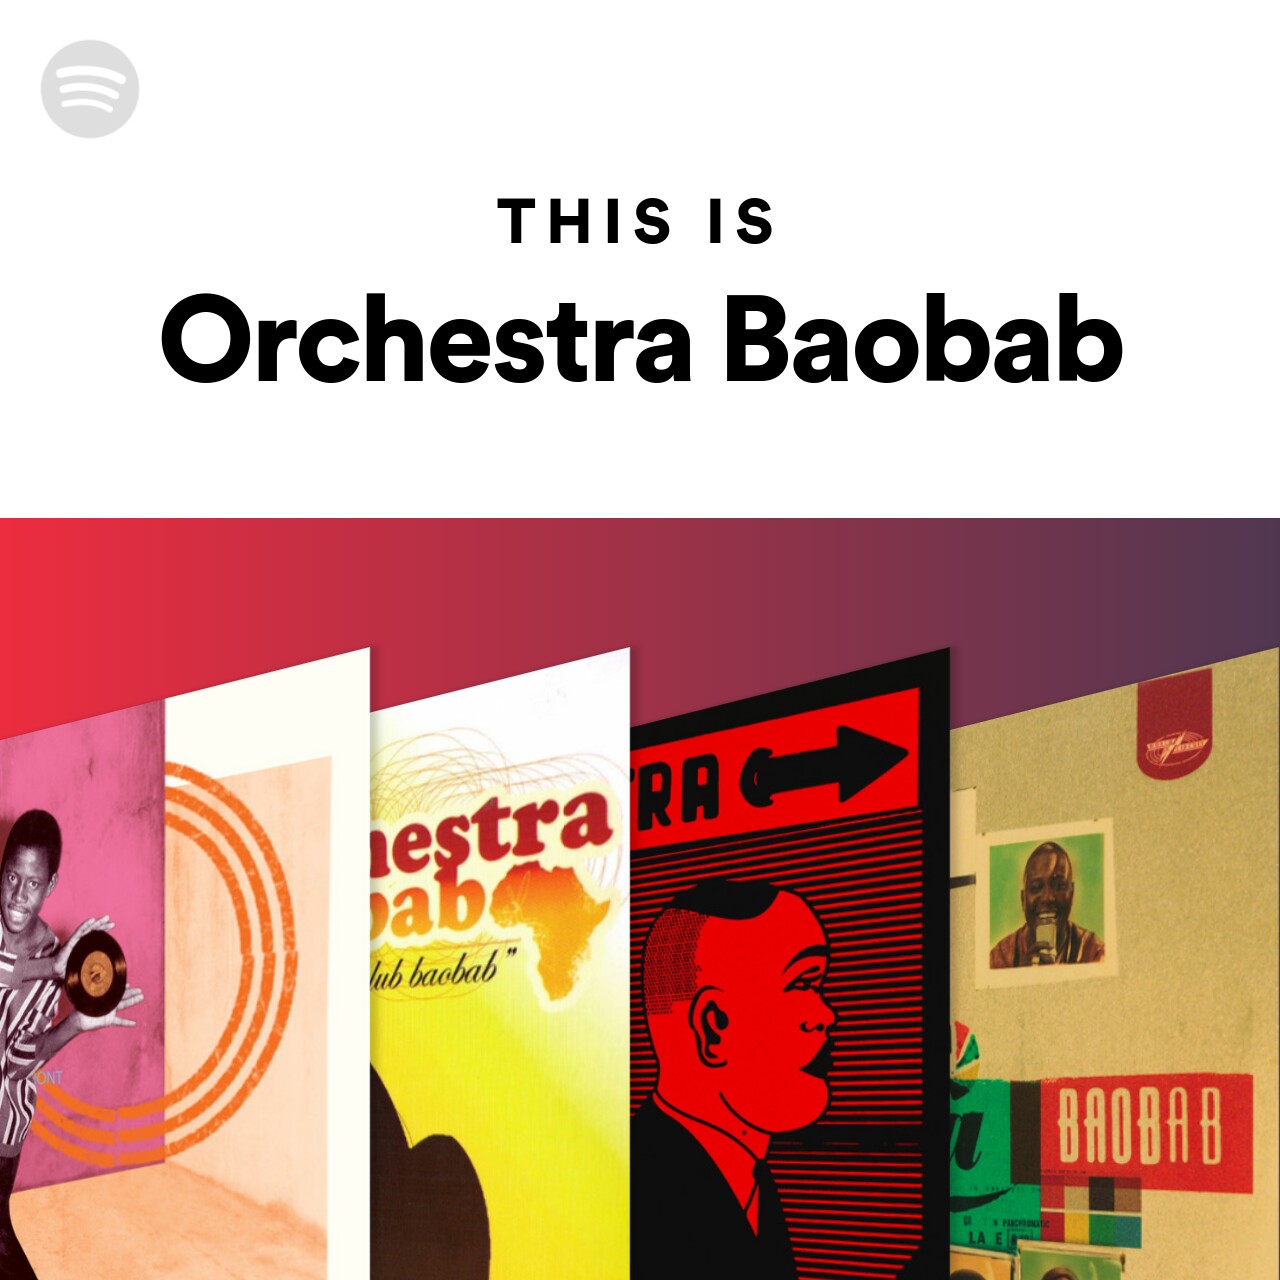 This Is Orchestra Baobab